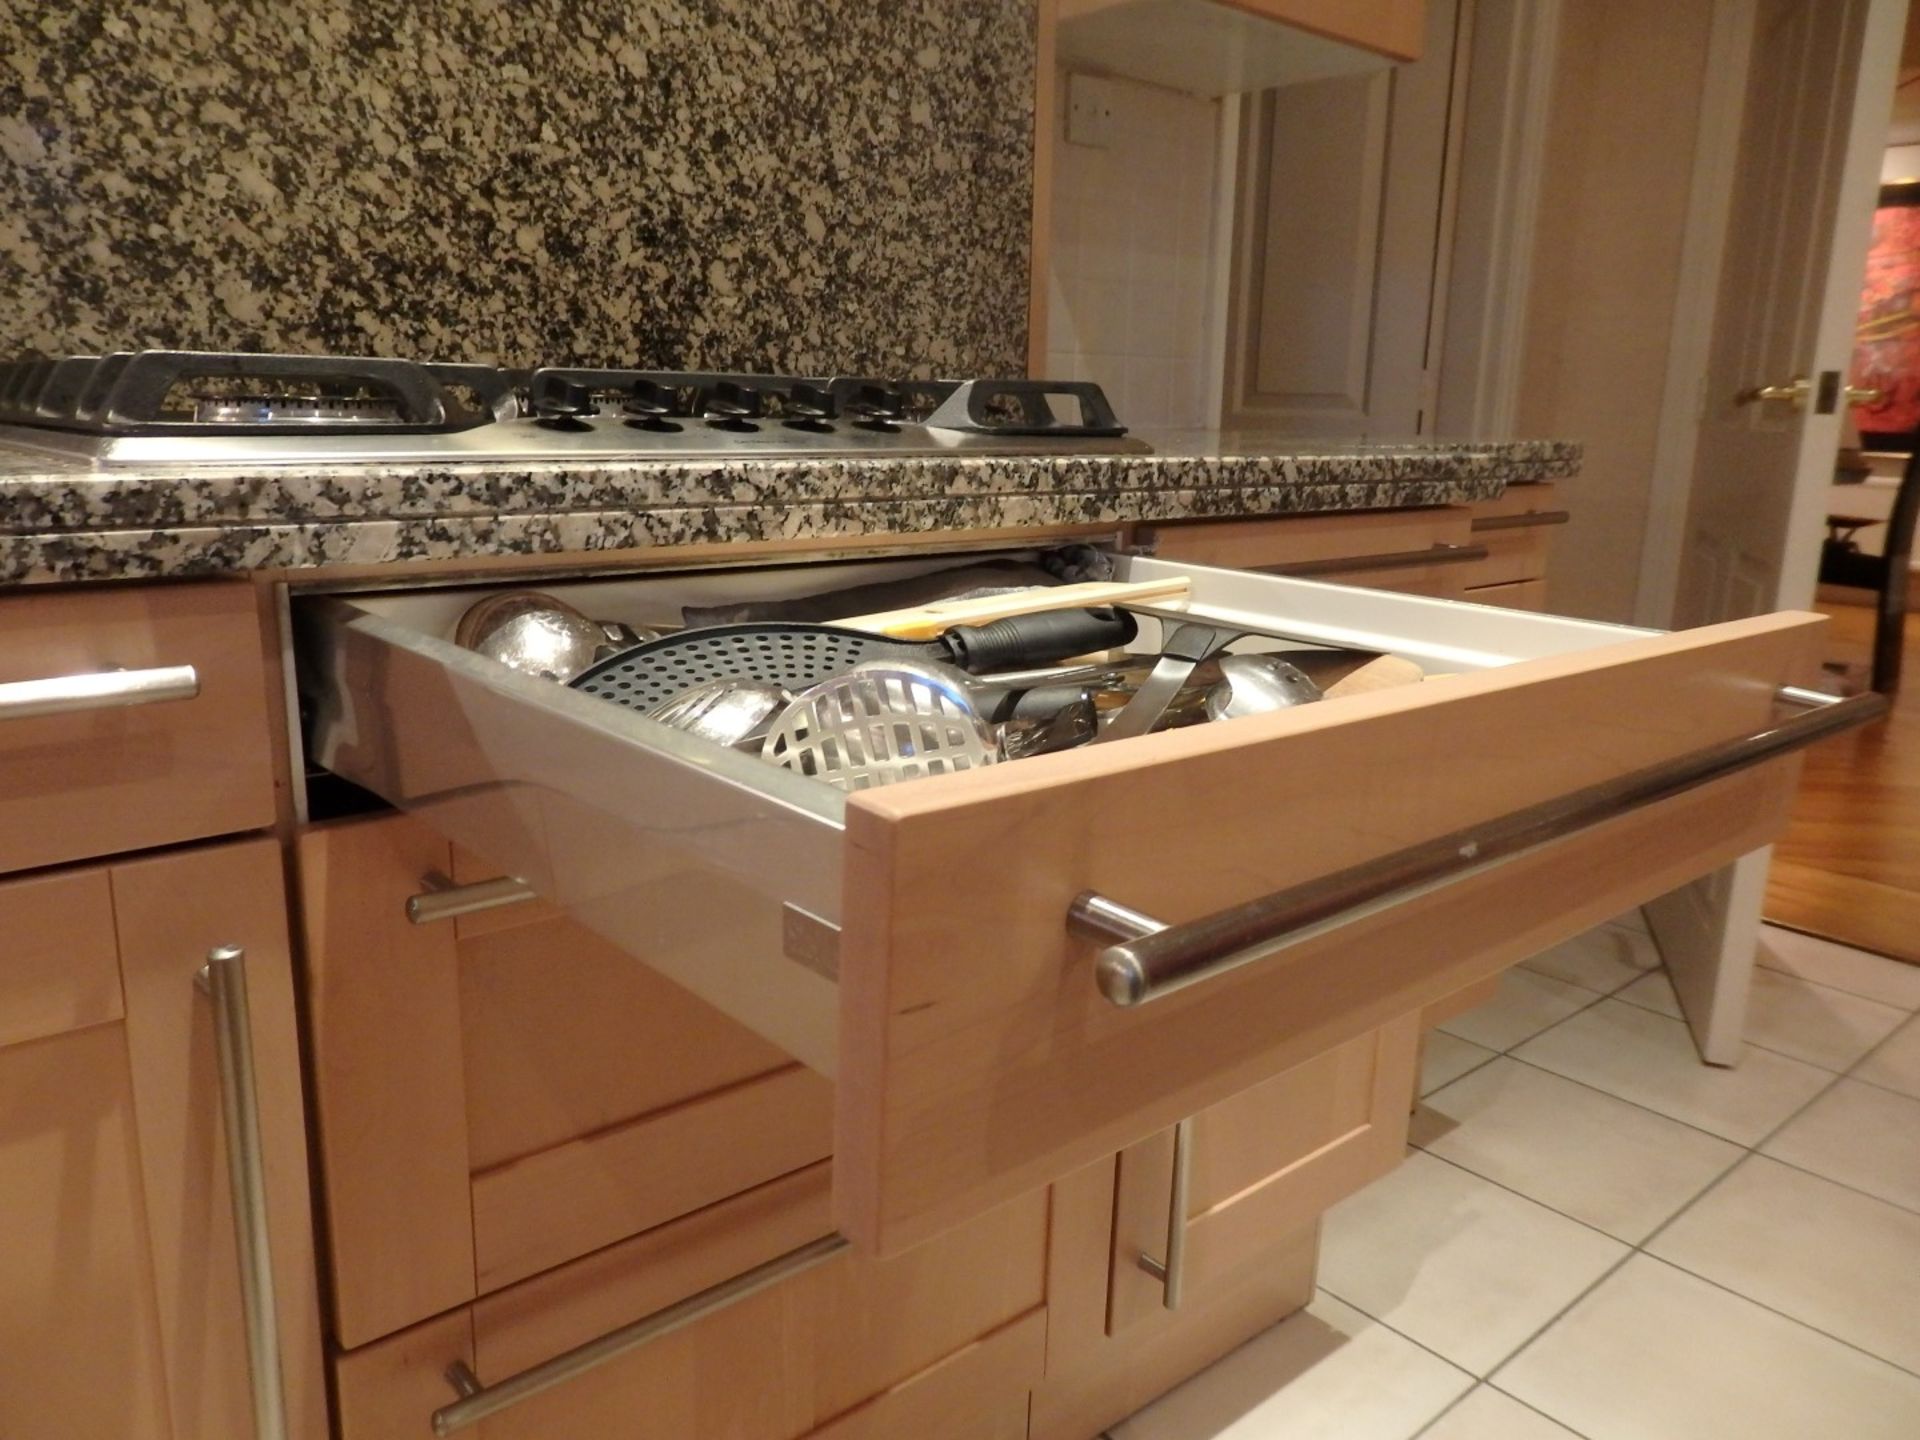 1 x Siematic Fitted Kitchen With Beech Shaker Style Doors, Granite Worktops, Central Island and - Image 65 of 148